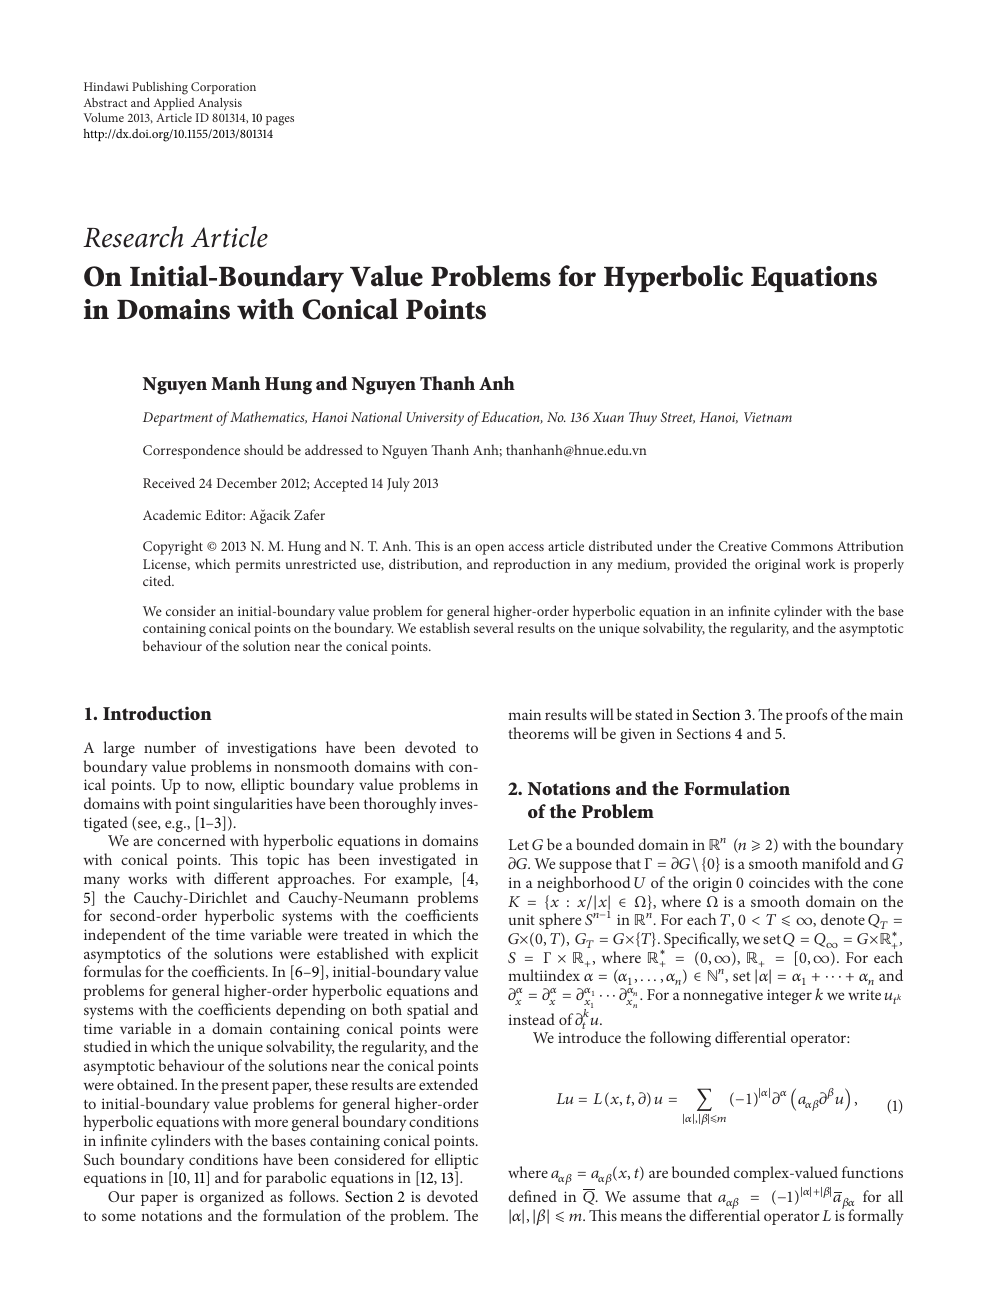 On Initial Boundary Value Problems For Hyperbolic Equations In Domains With Conical Points Topic Of Research Paper In Mathematics Download Scholarly Article Pdf And Read For Free On Cyberleninka Open Science Hub